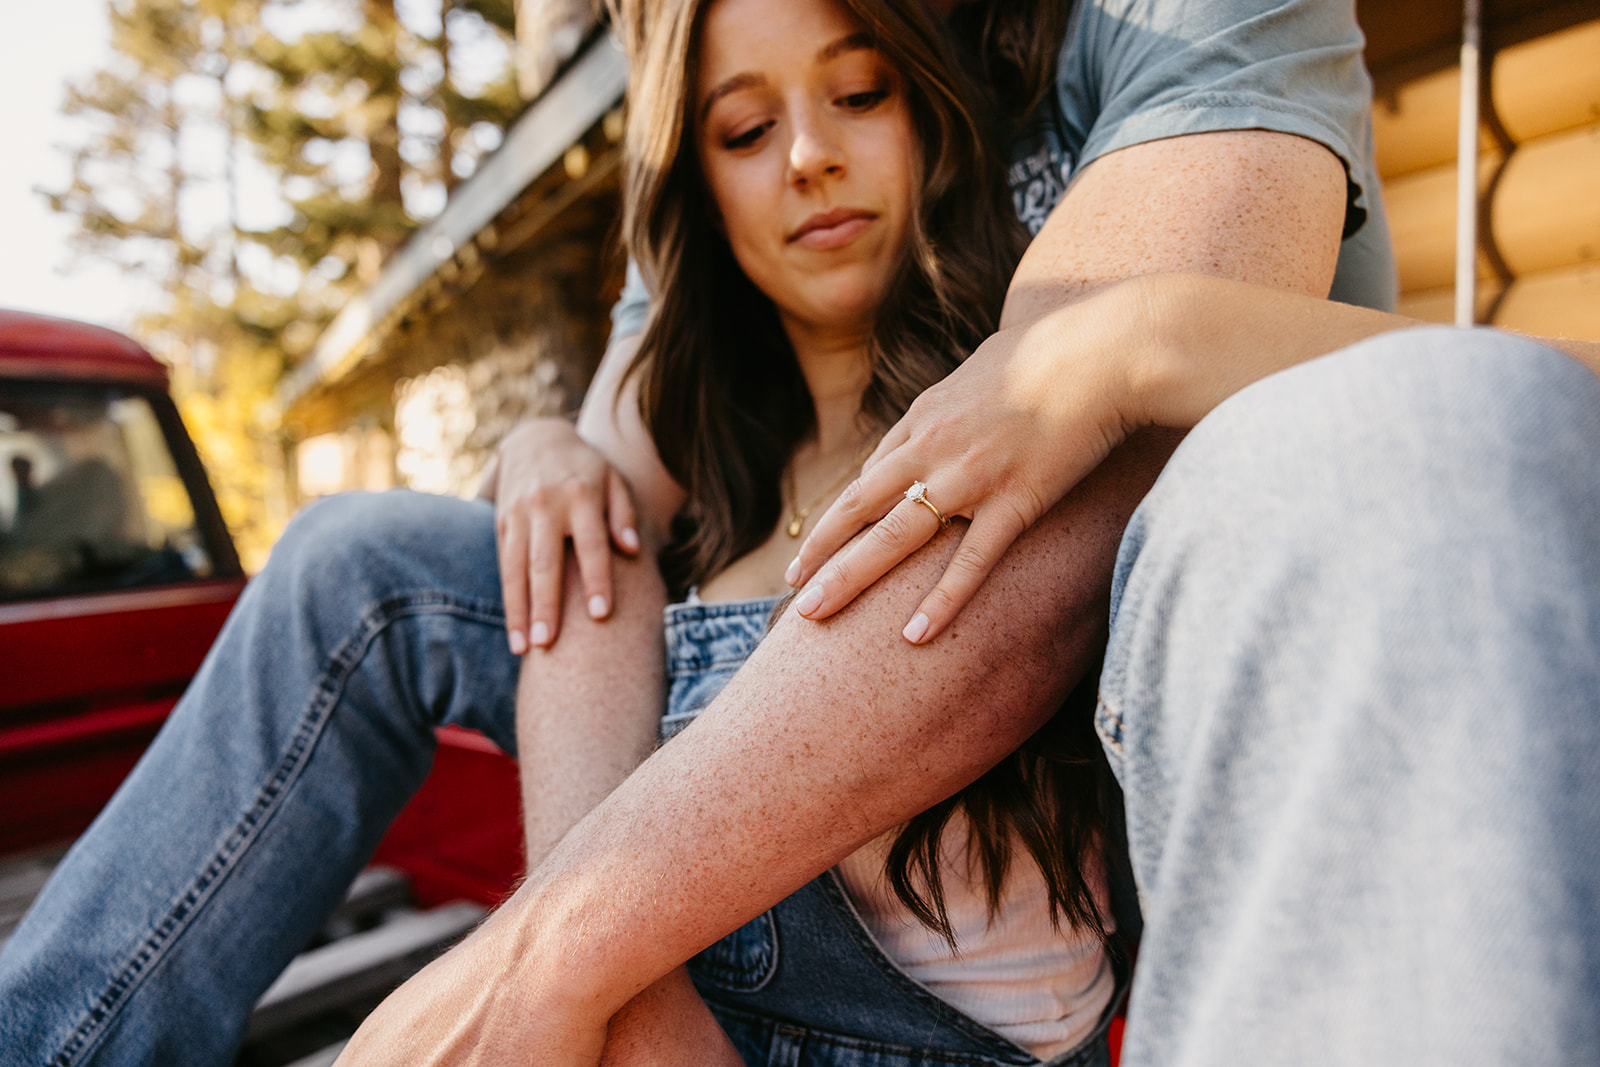 Dani Rawson Photo, a Tahoe-based Photographer, shares photos from a Fireside Lodge Engagement Session in Lake Tahoe, Nev